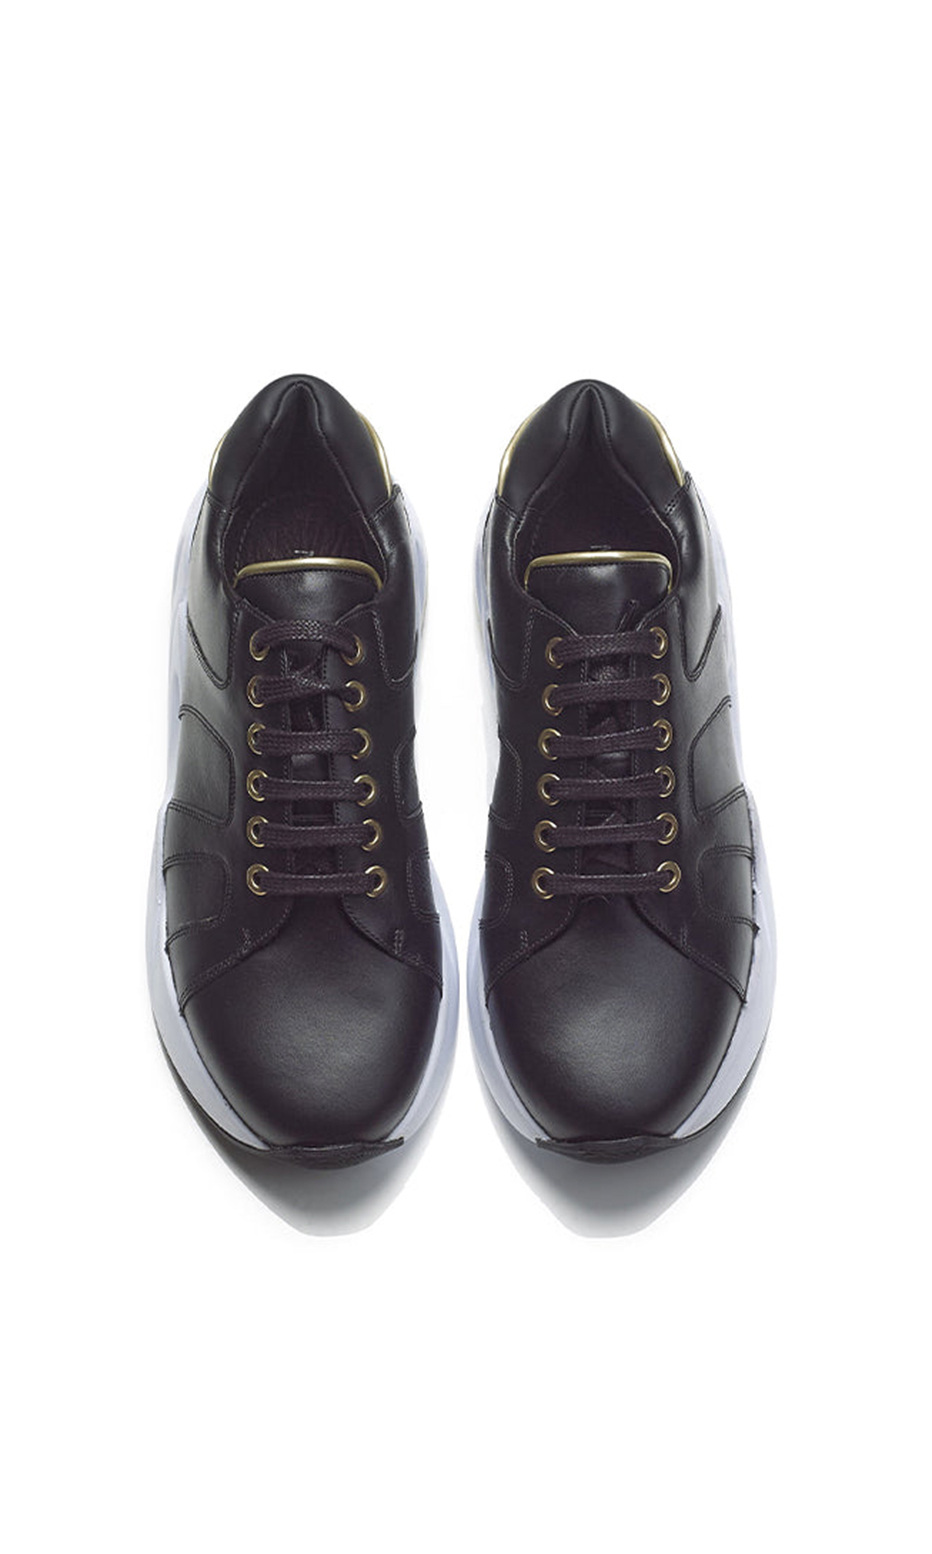 chunky black leather sneakers